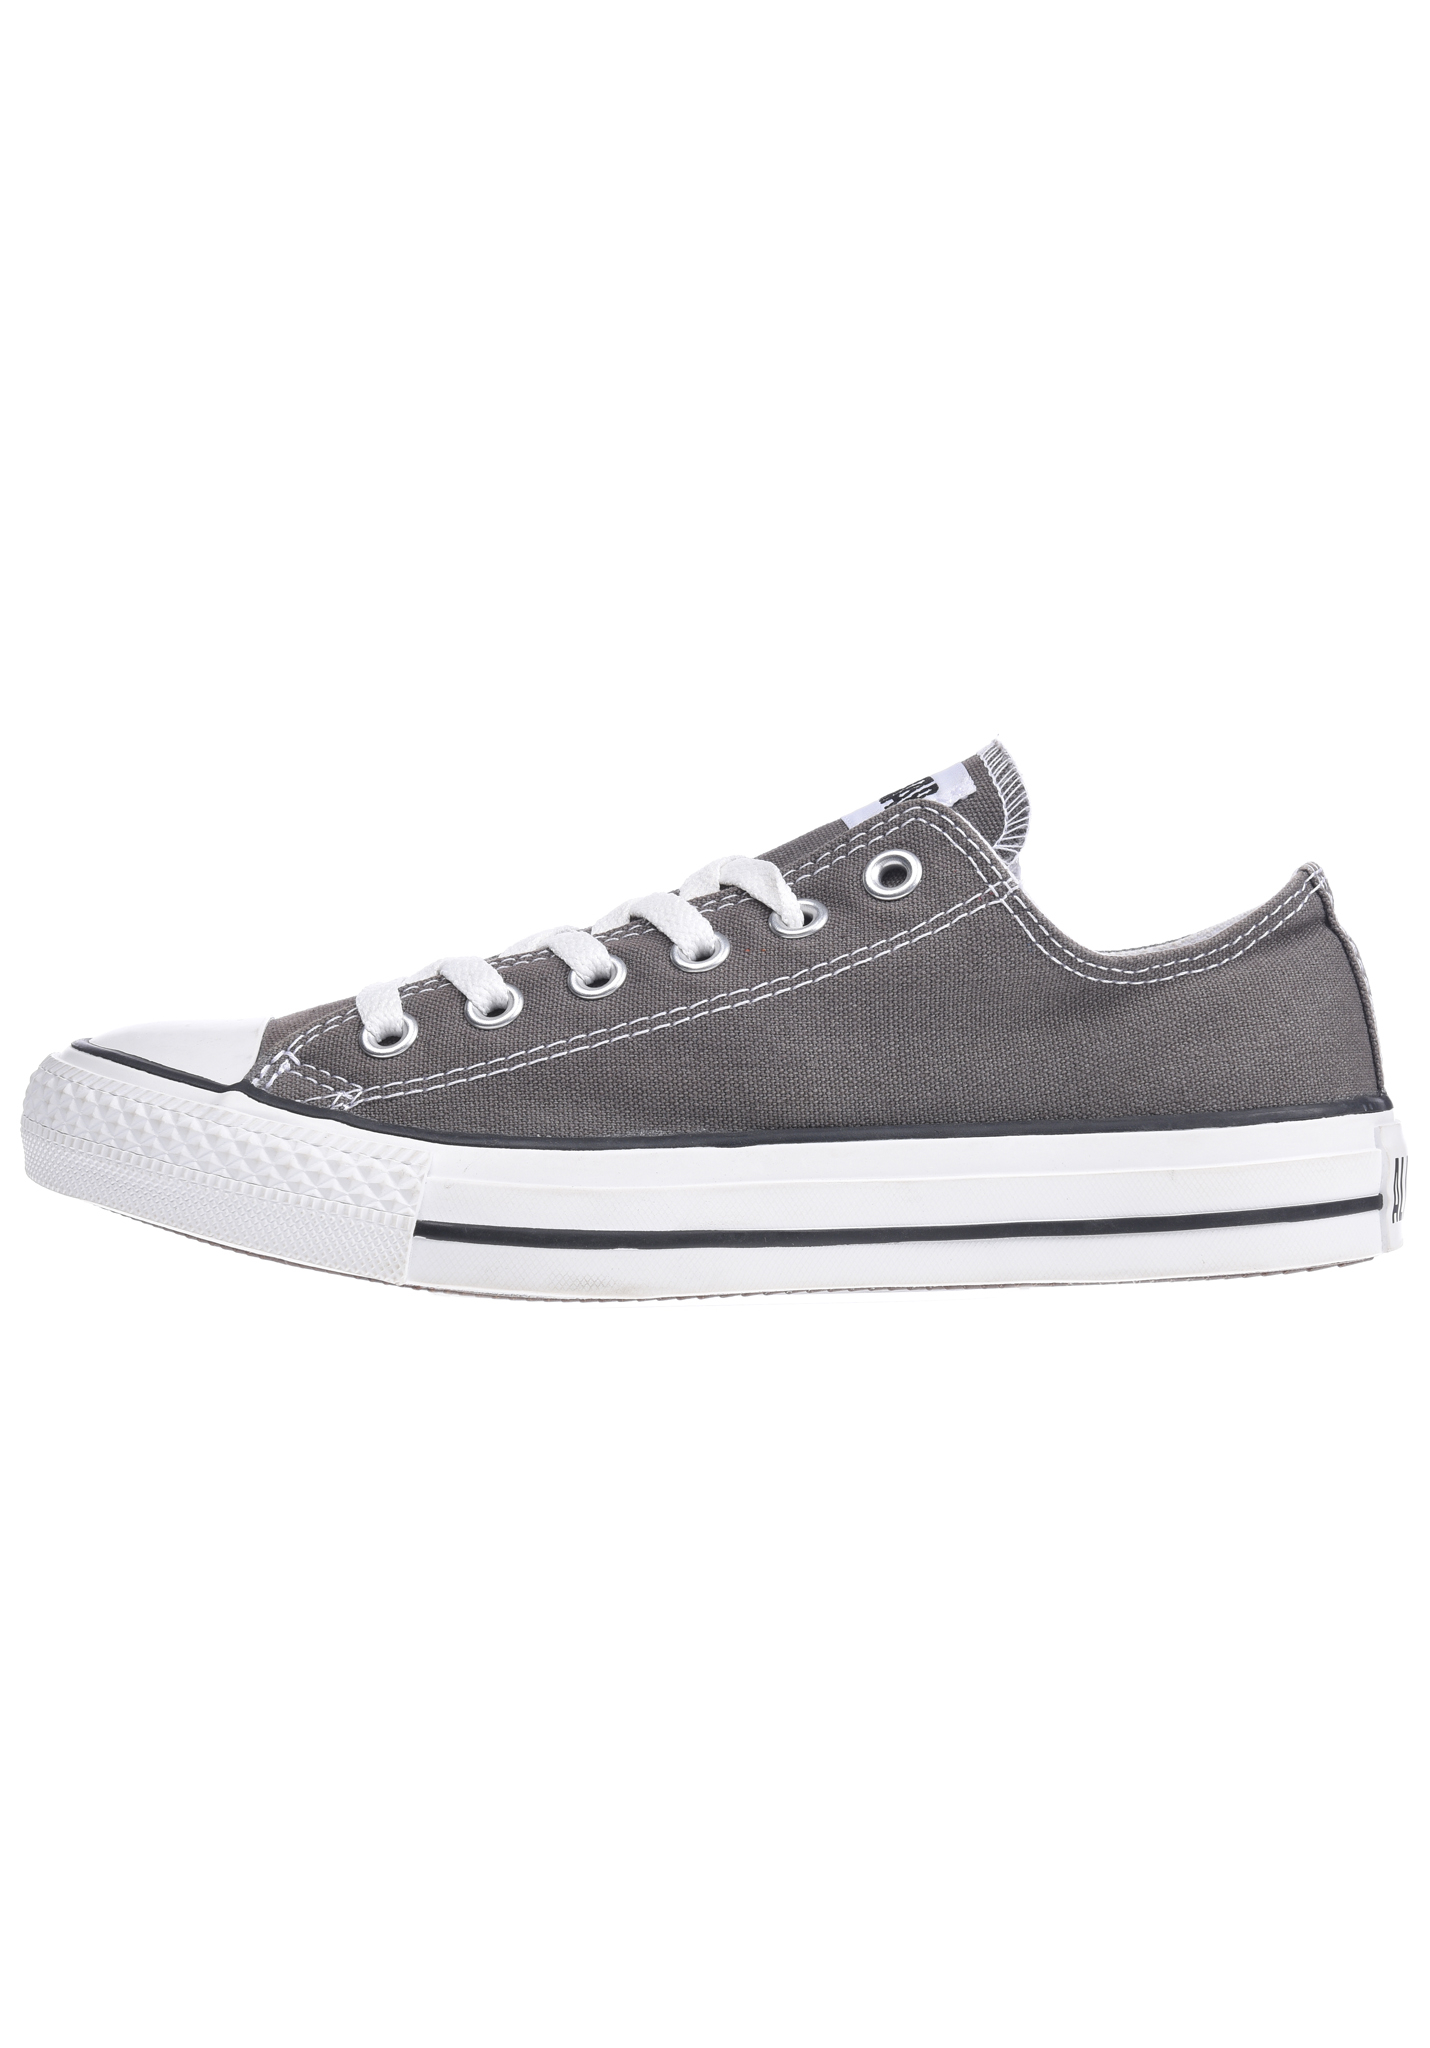 Converse Chuck Taylor All Star Ox Sneaker Low charcoal 44,5